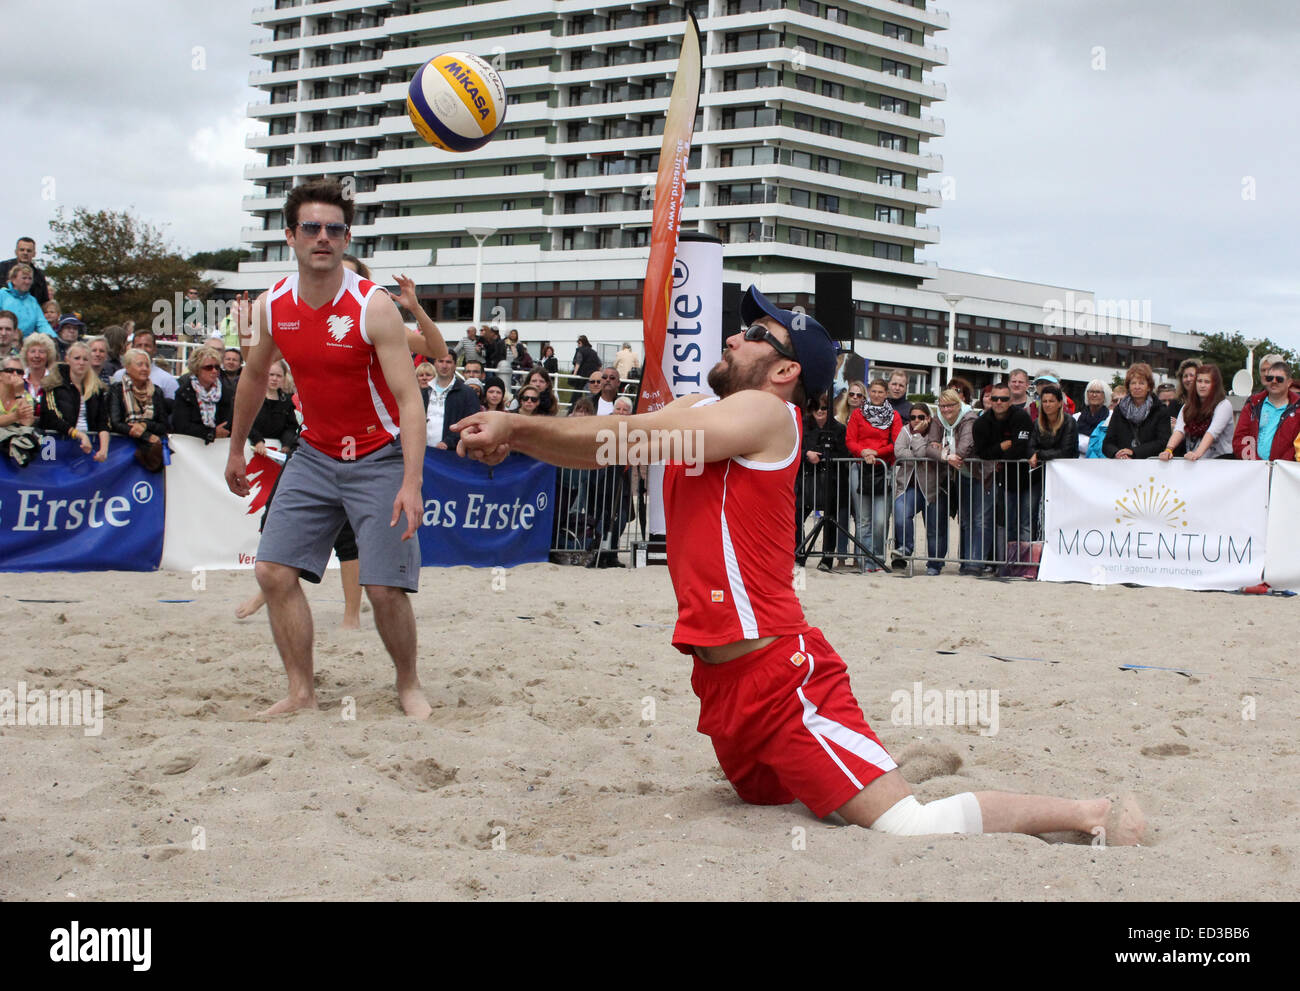 8th annual Beach Volleyball StarCup with celebrities from TV shows Verbotene Liebe, Sturm der Liebe, Rote